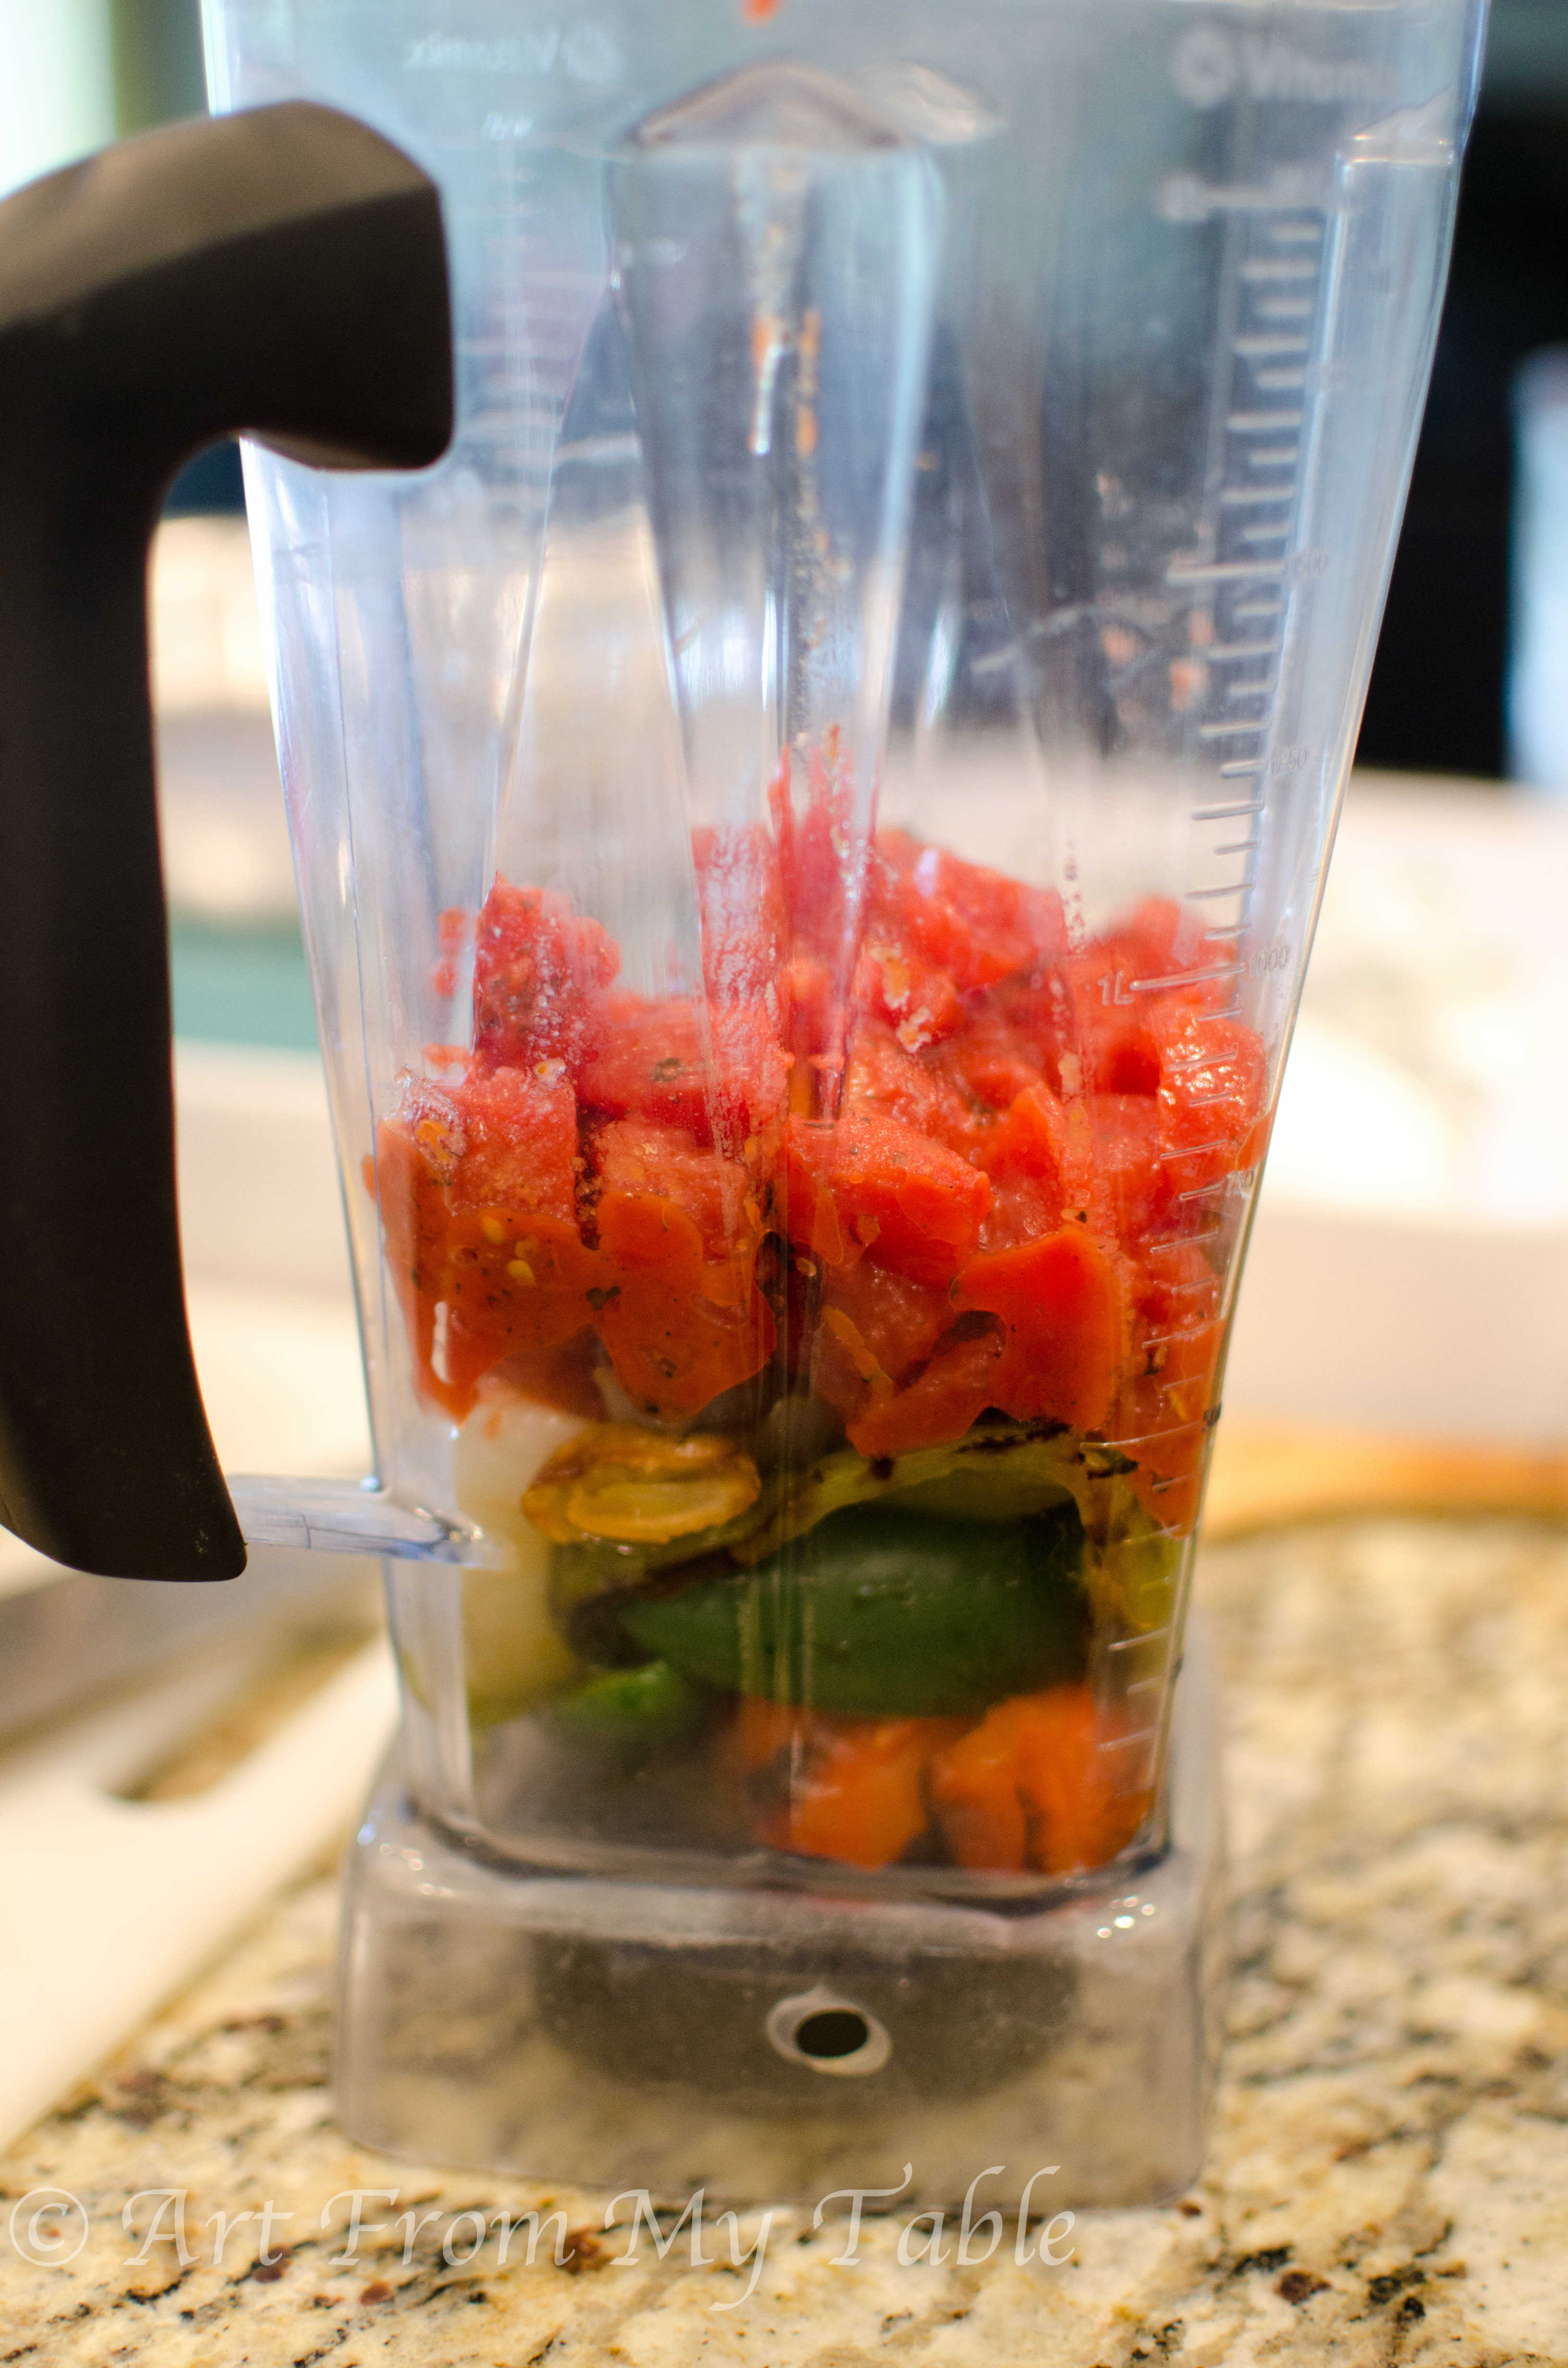 Blender with charred veggies, and diced tomatoes. 